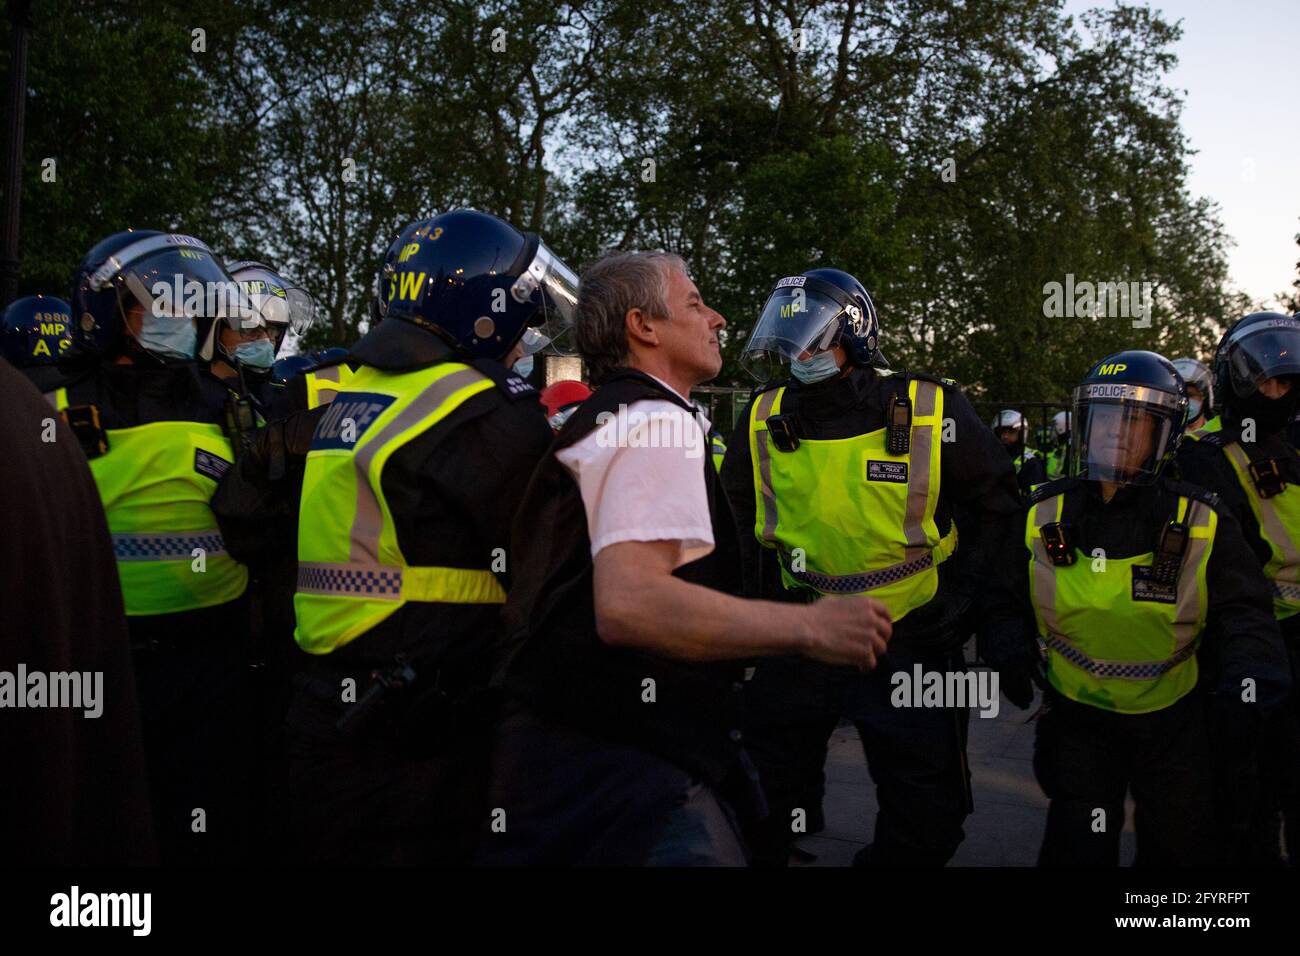 London, UK. 29th May, 2021. Unite For Freedom Protest, London, UK Credit: Yuen Ching Ng/Alamy Live News Stock Photo